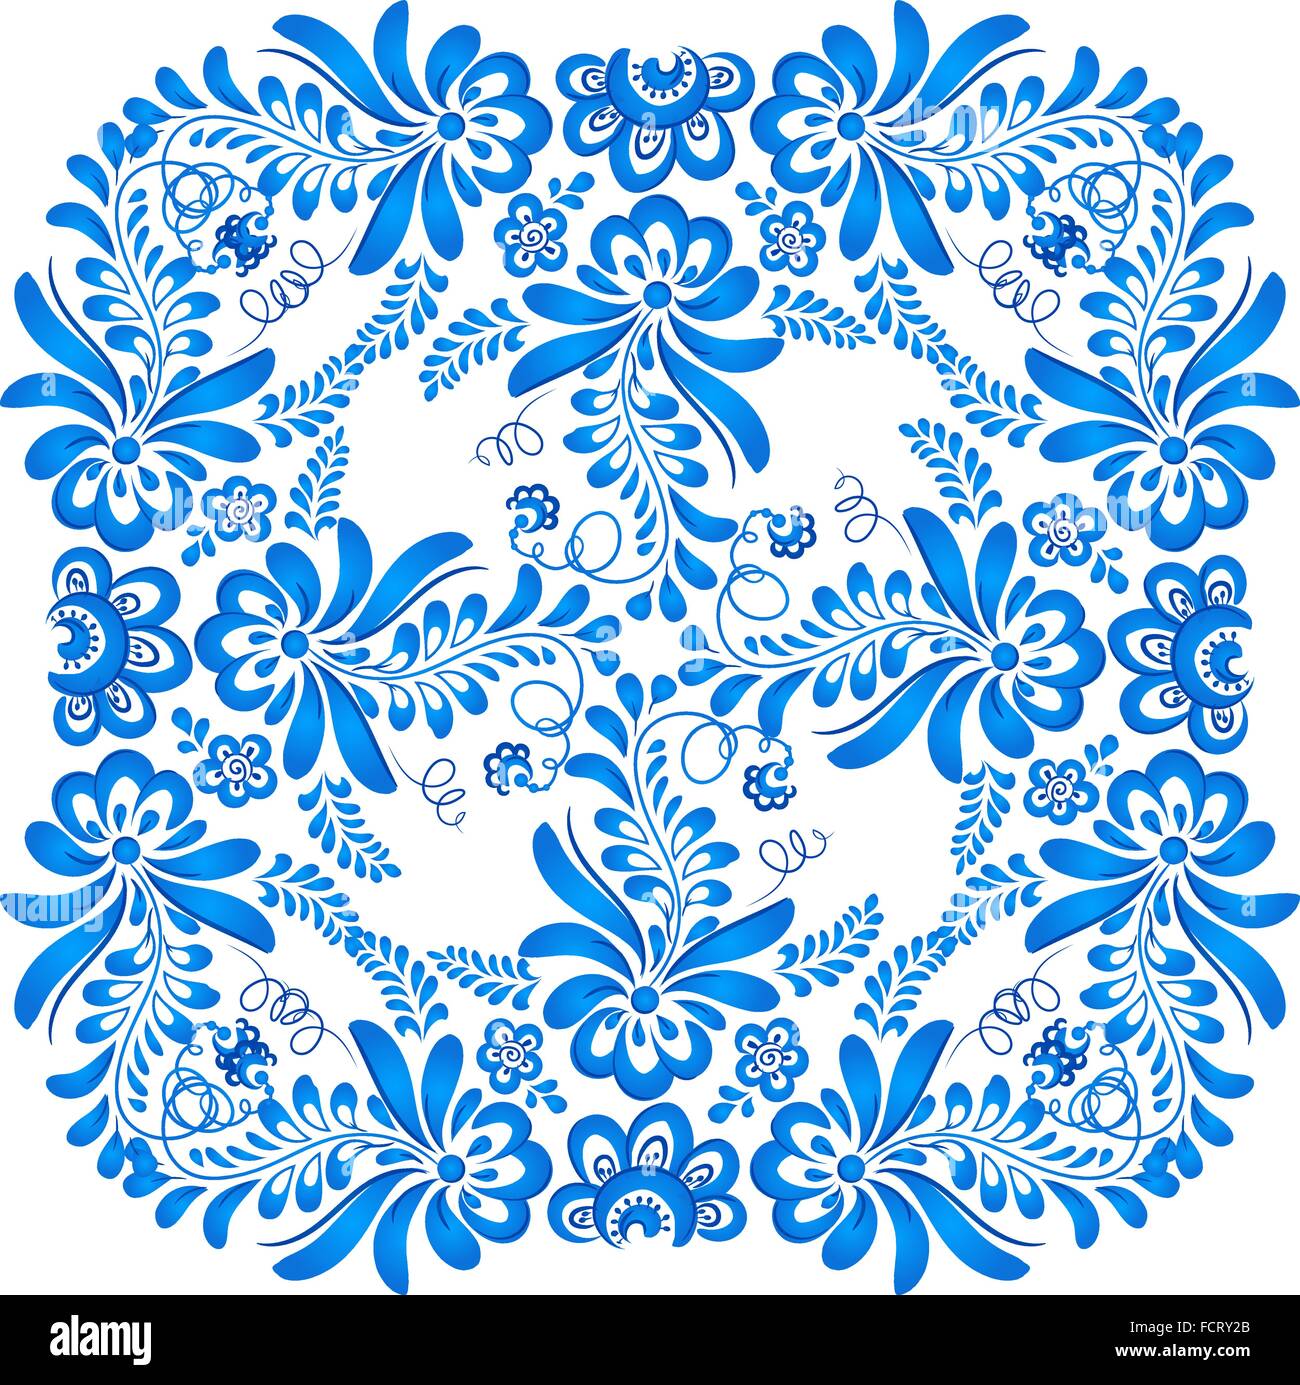 Blue floral ornament in gzhel style Stock Vector